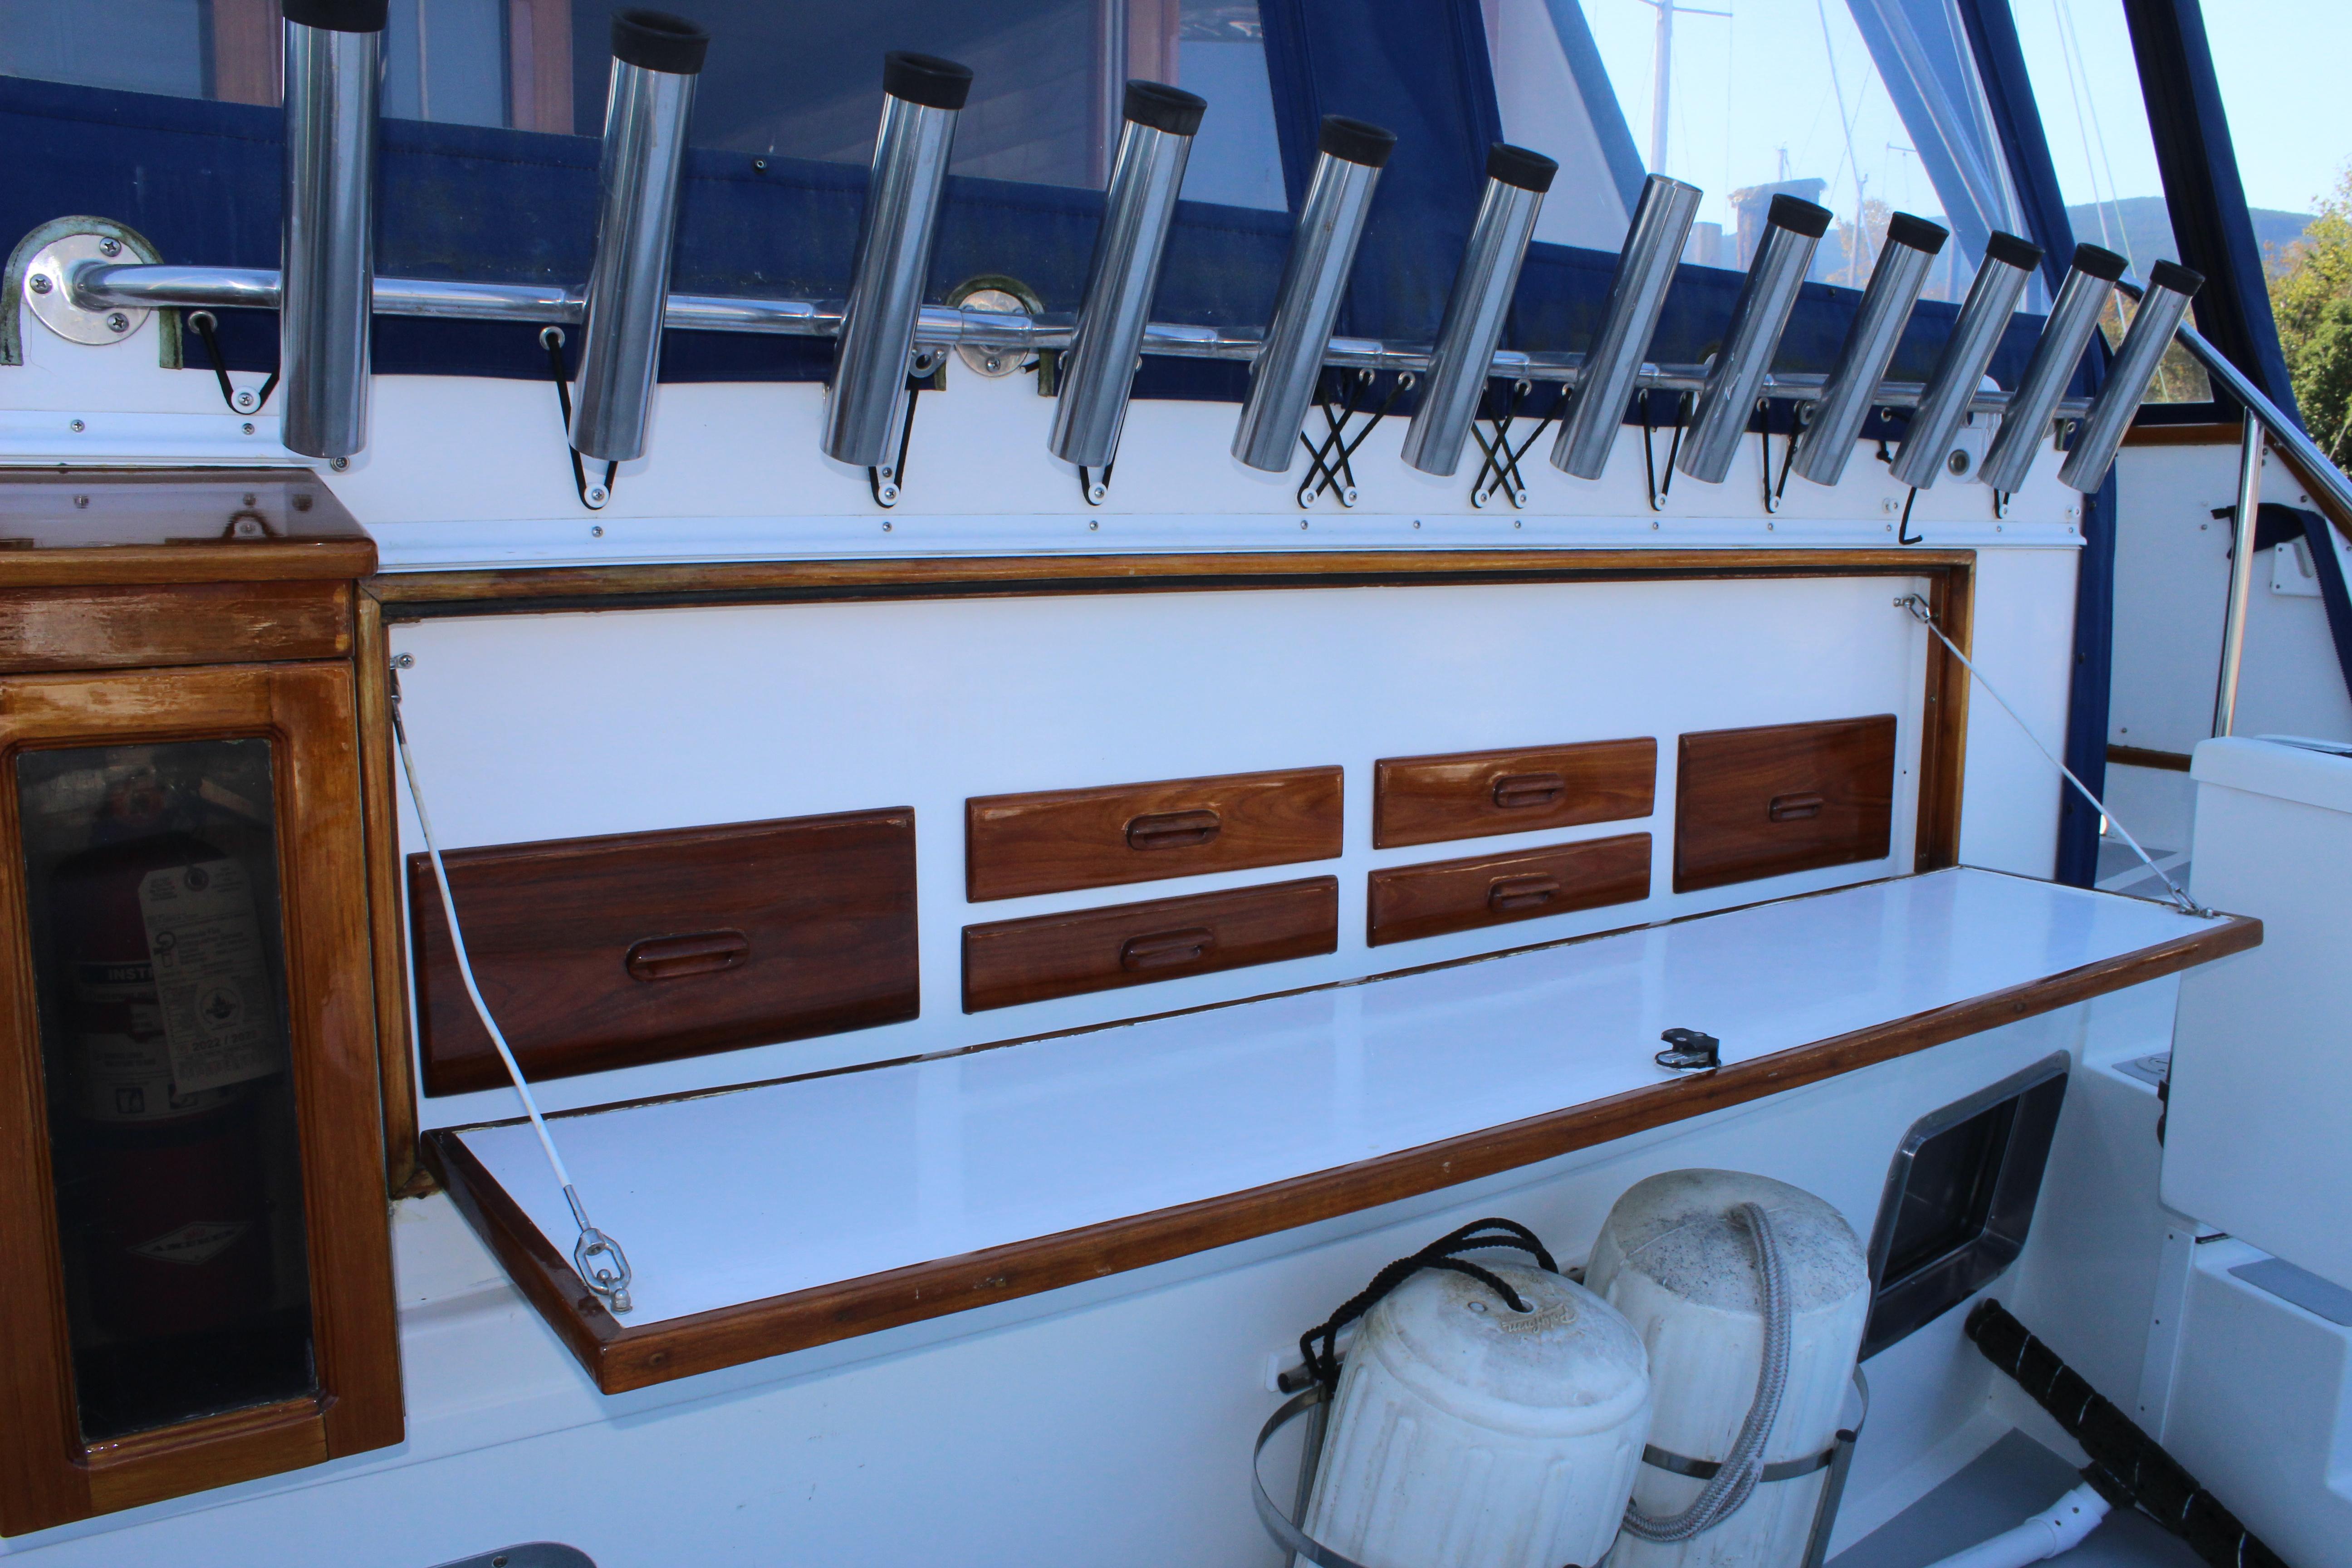 Leisure-lee Yacht for Sale, 62 Defever Yachts Sequim, WA